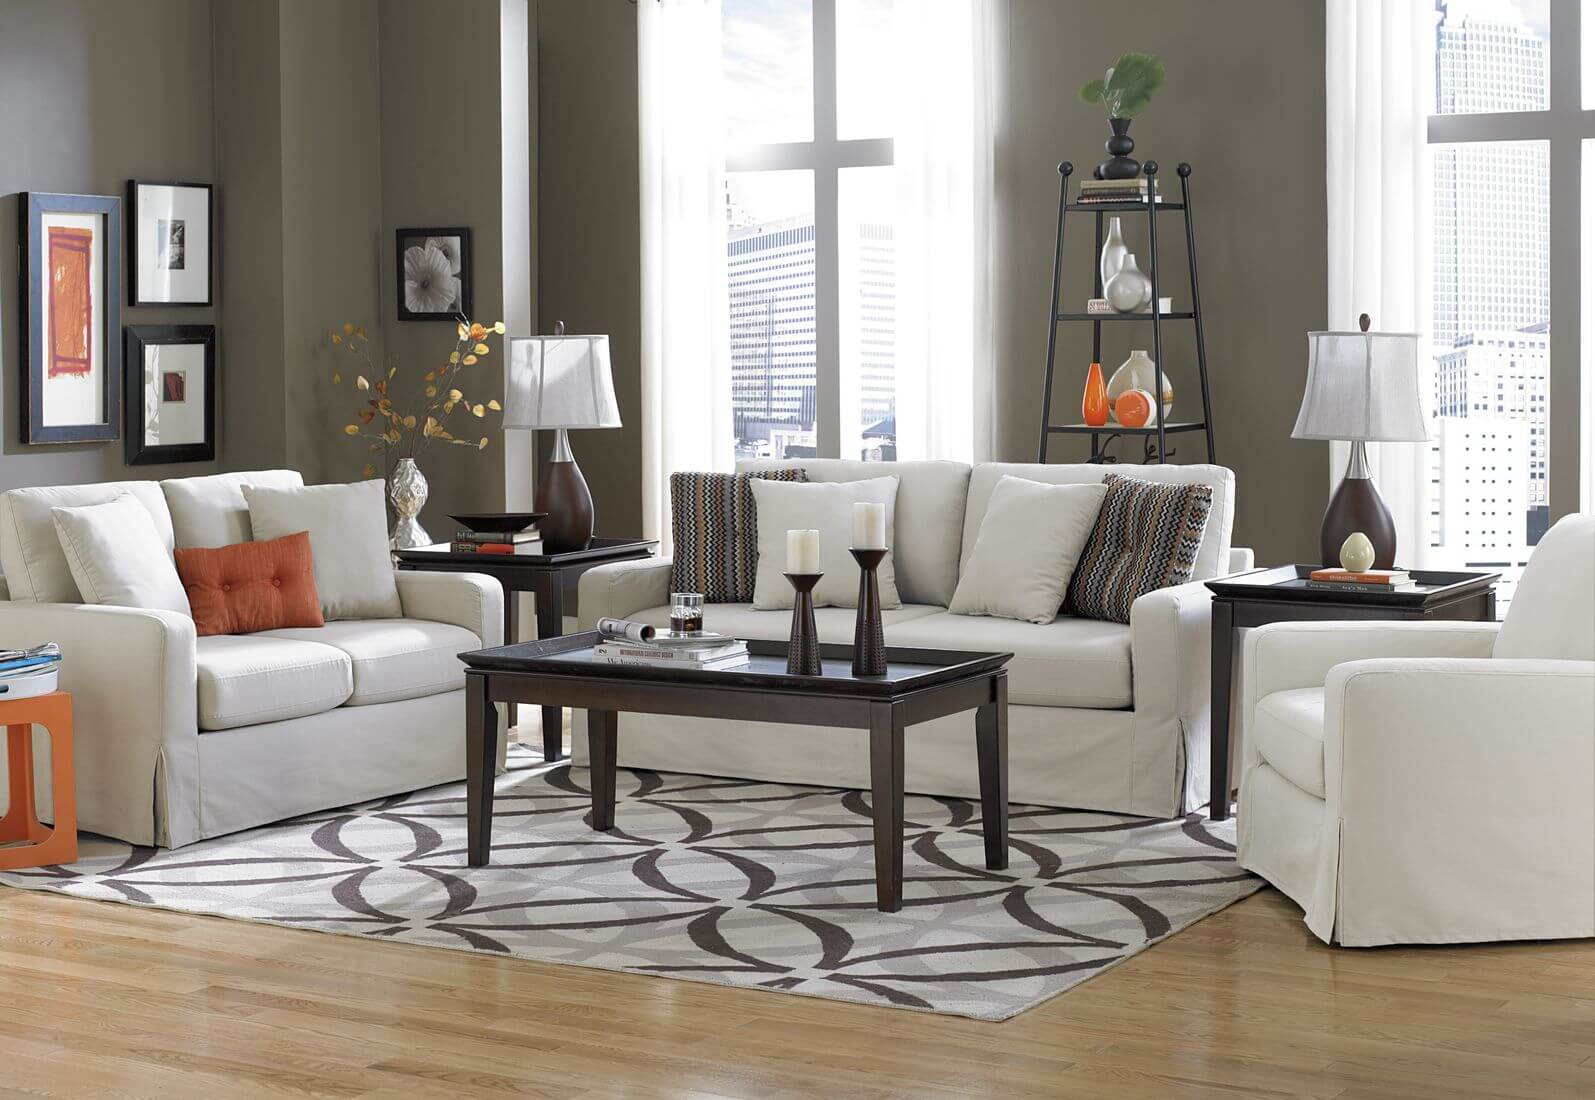 Rugs For Living Room
 40 Living Rooms with Area Rugs for Warmth & Richness